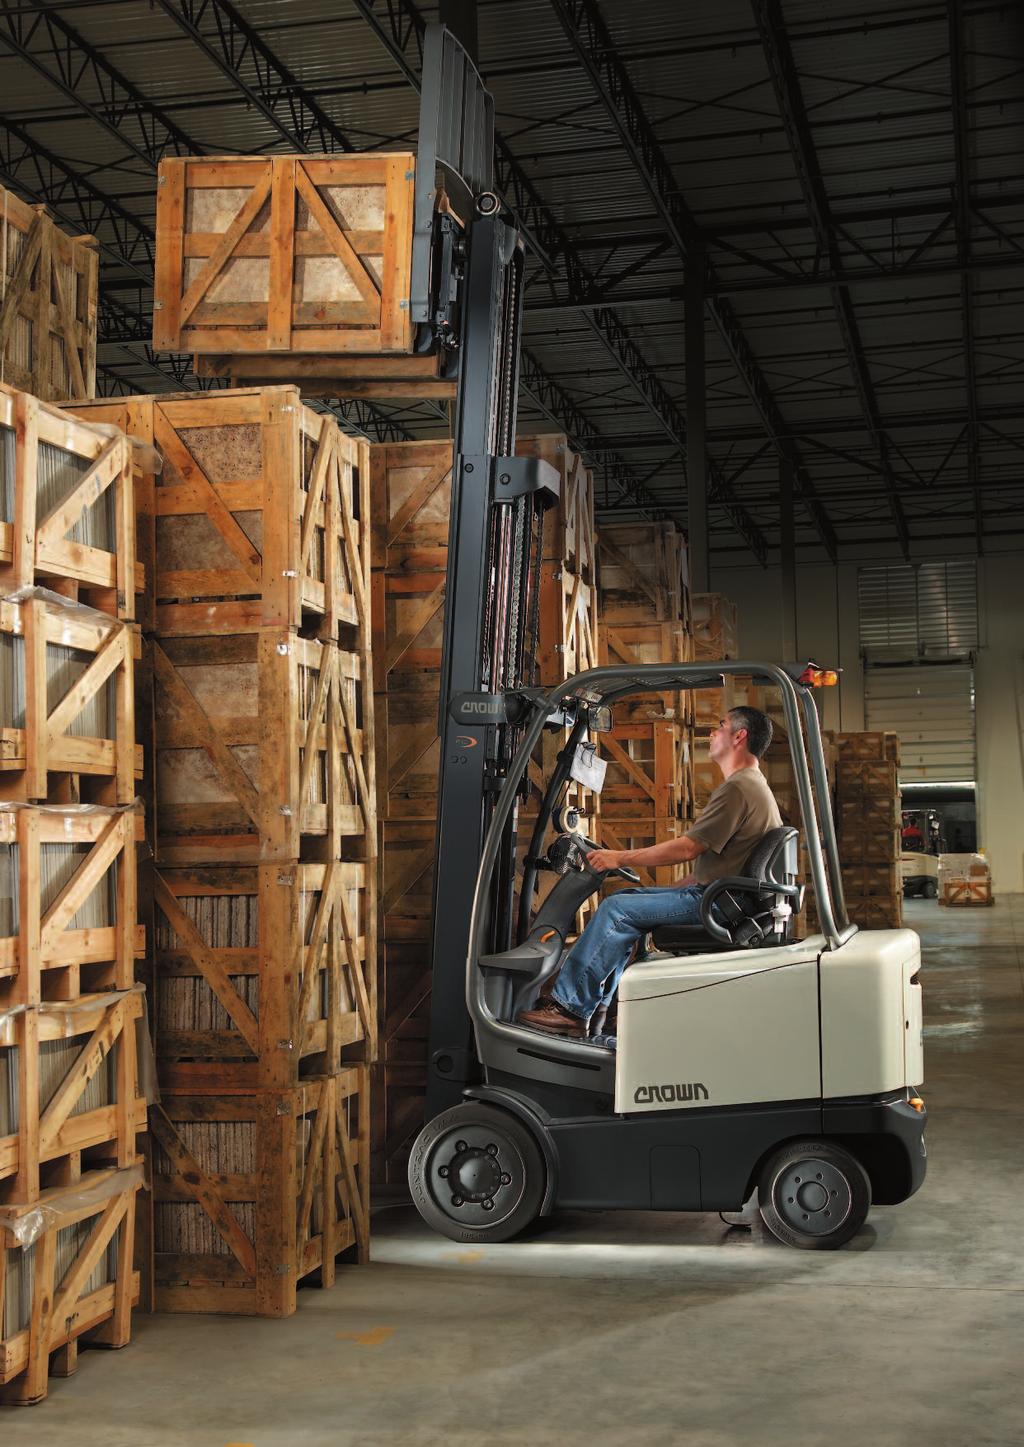 Oe smart, tough lift truck. Couterbalaced lift trucks face some of the most demadig material hadlig tasks.